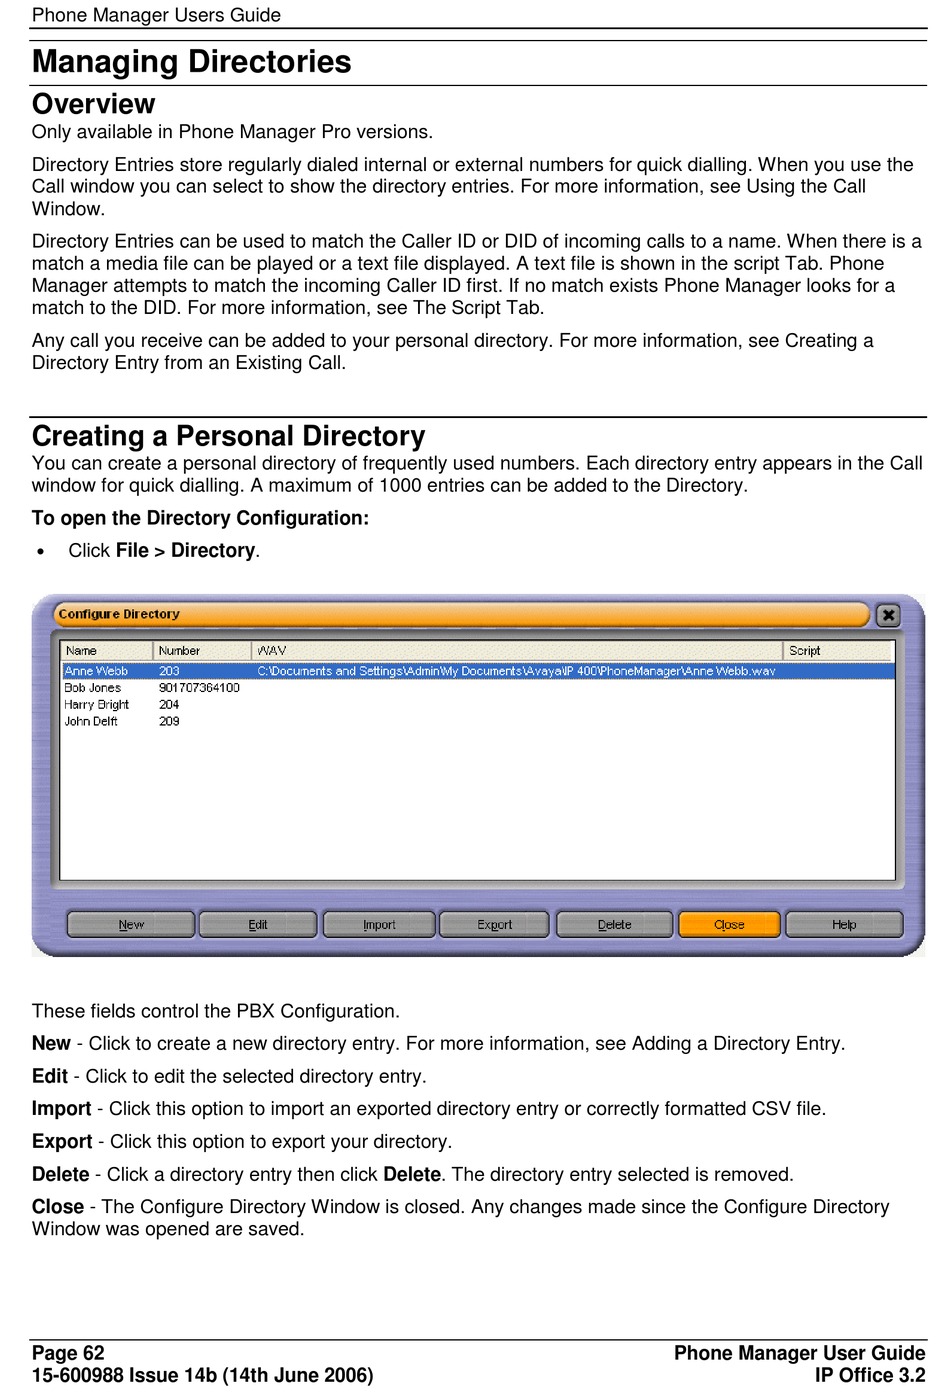 Managing Directories; Overview; Creating A Personal Directory - Avaya IP  Office  User Manual [Page 68] | ManualsLib